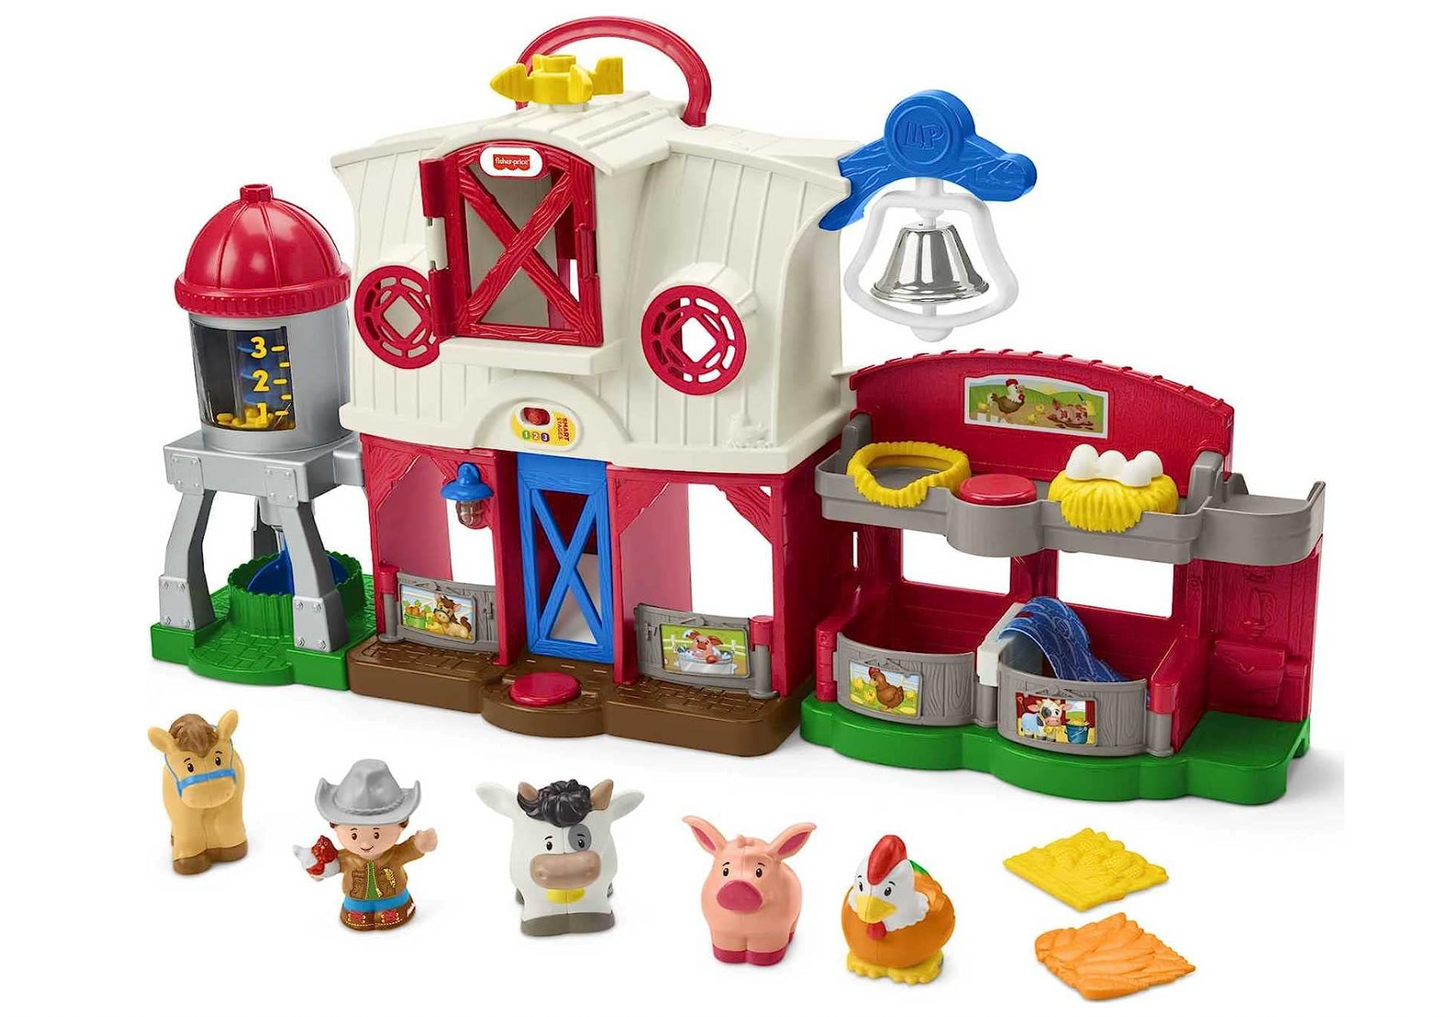 Fisher-Price Little People Toddler Learning Toy Caring For Animals Farm Electronic Playset With Smart Stages For Ages 1+ Years